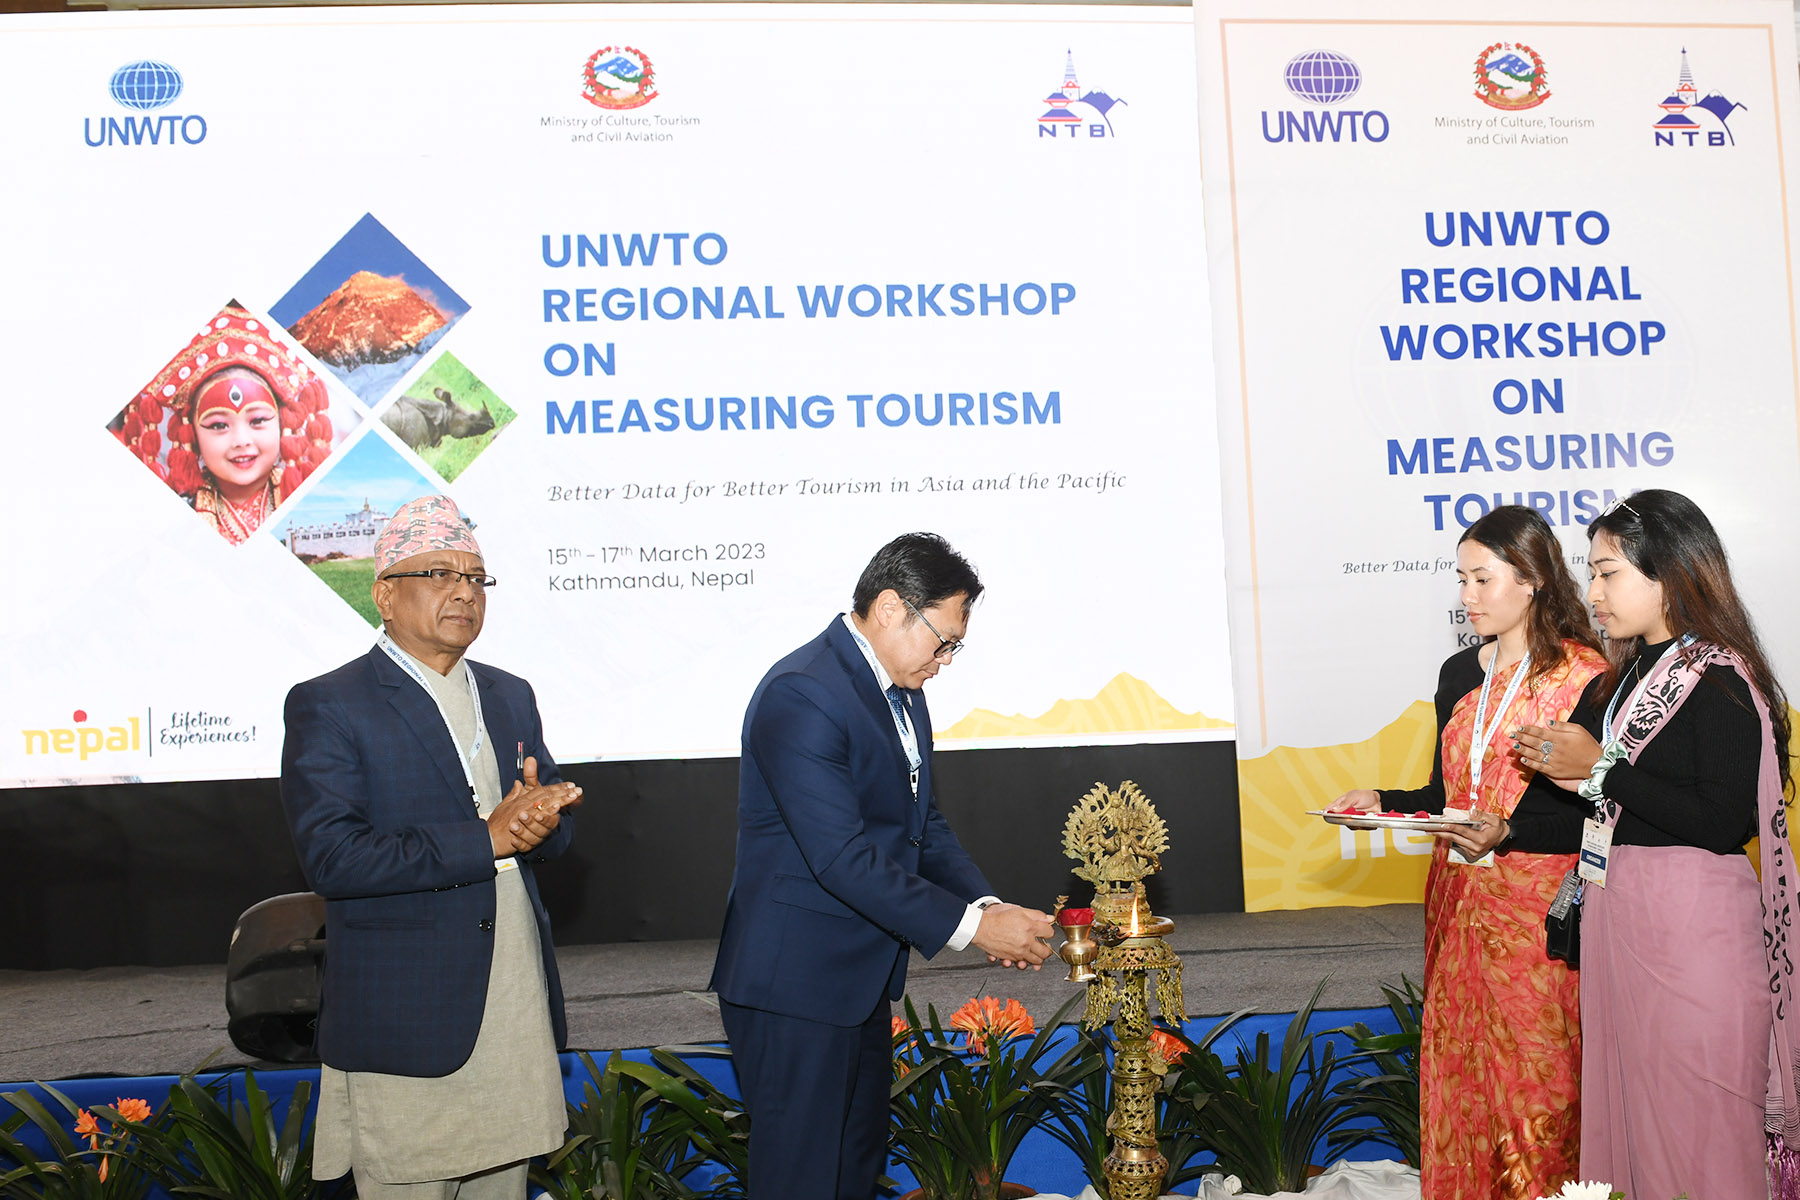 UNWTO REGIONAL WORKSHOP ON MEASURING TOURISM "Better data for better tourism in Asia and the Pacific" Inauguration Ceremony (15 March 2023)